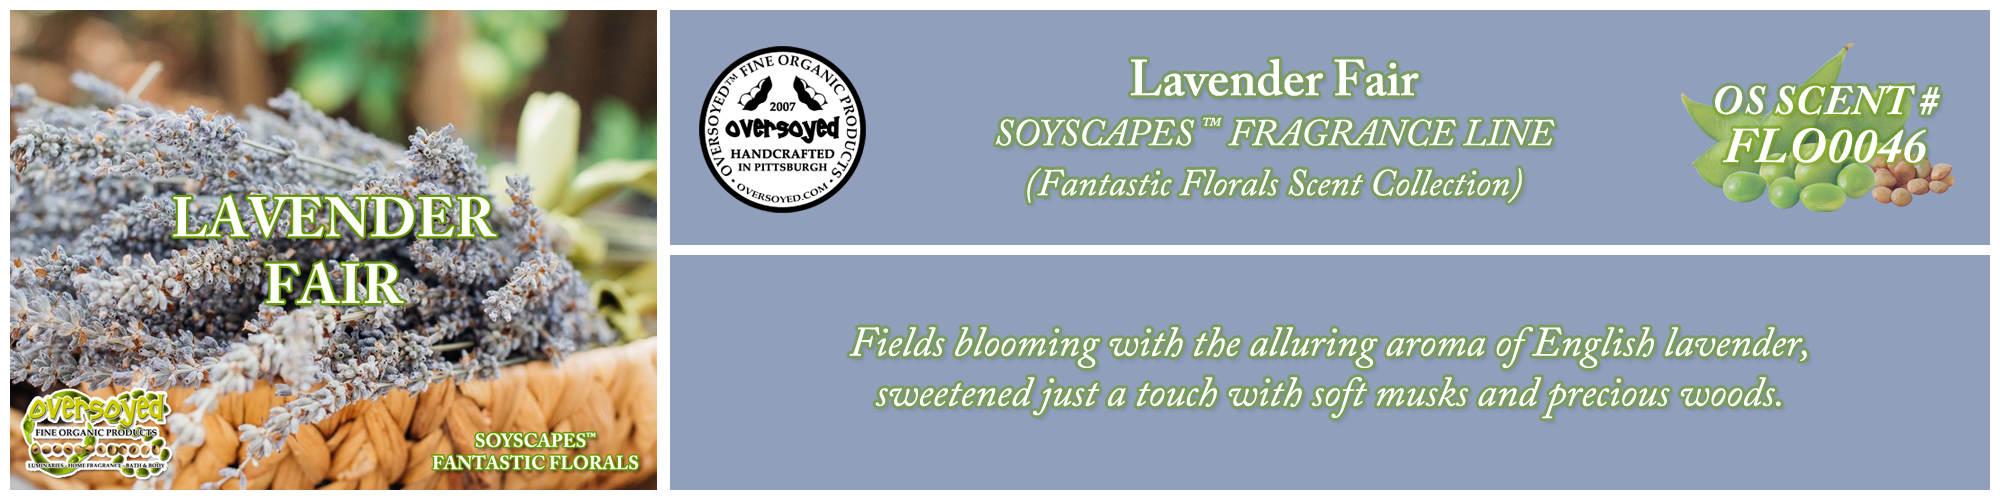 Lavender Fair Handcrafted Products Collection